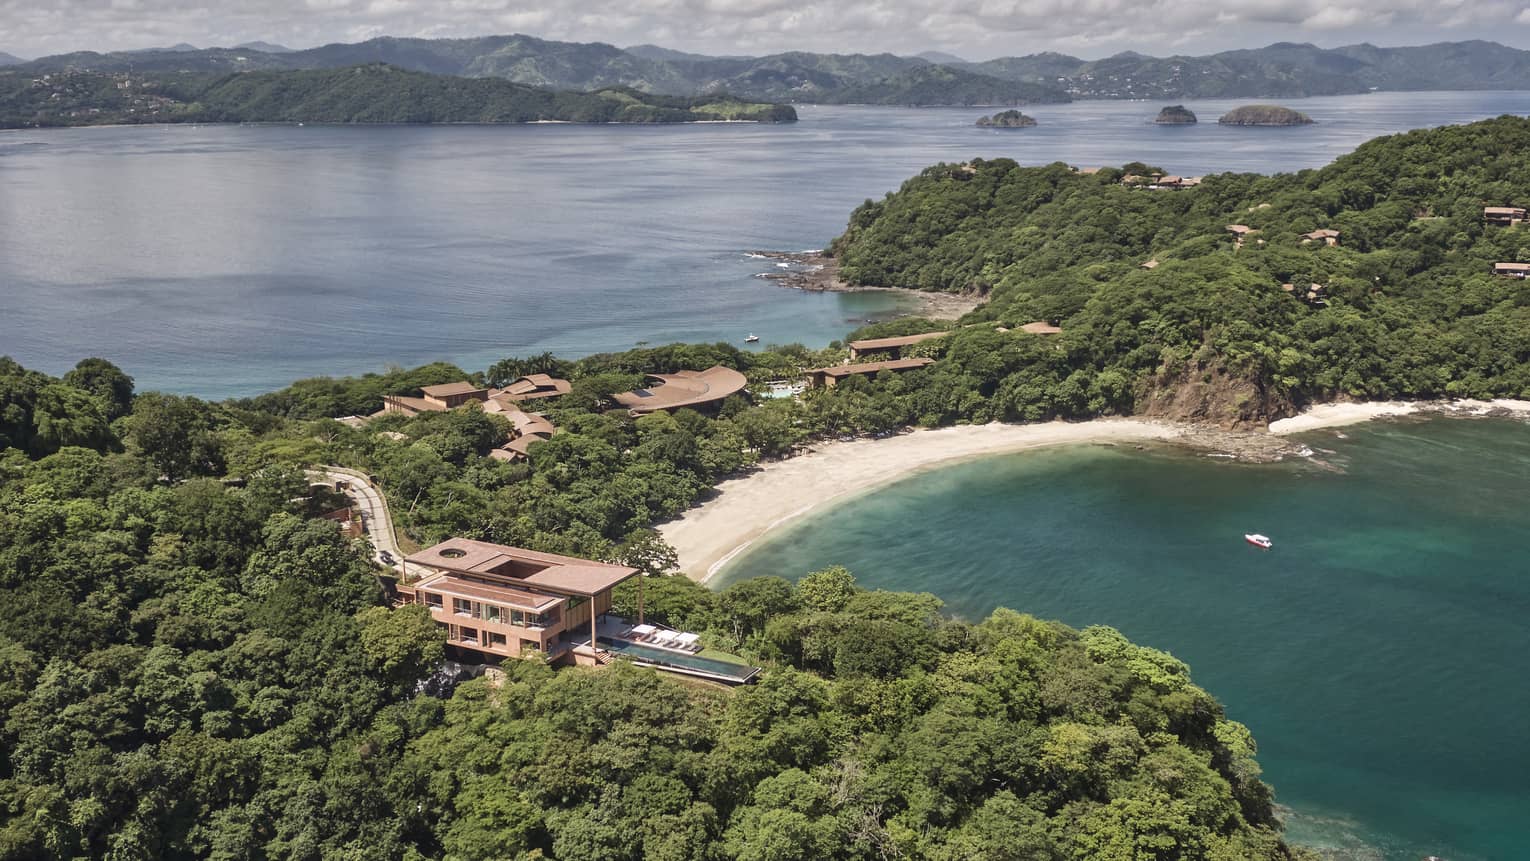 Aerial view of a private villa surrounded by trees near a beach/bay